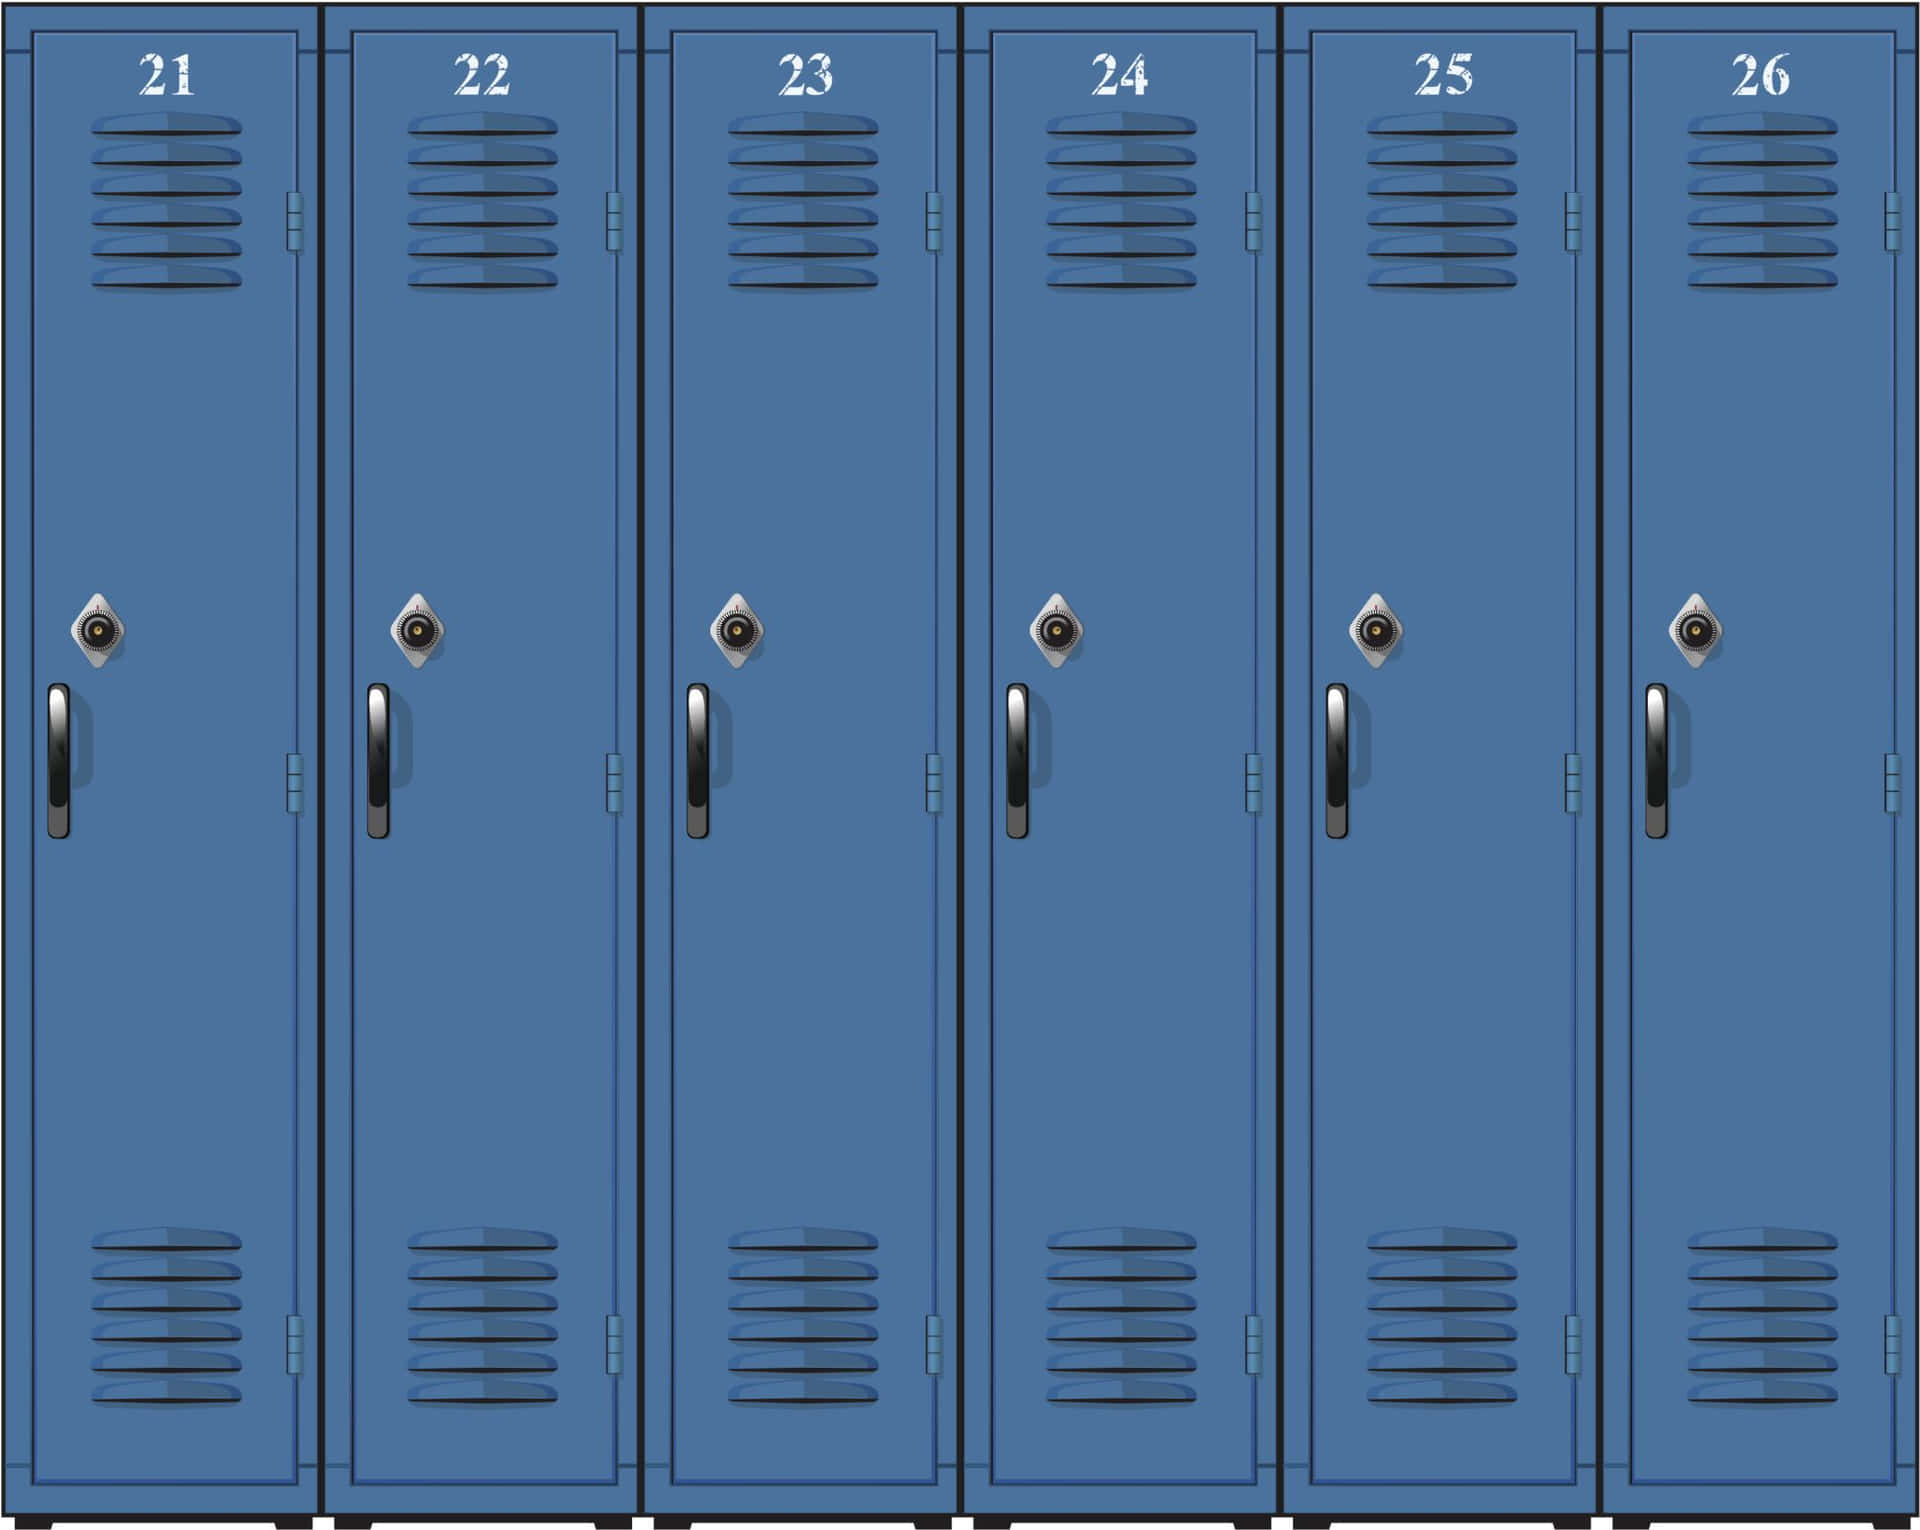 Blue Lockers With Numbers On Them